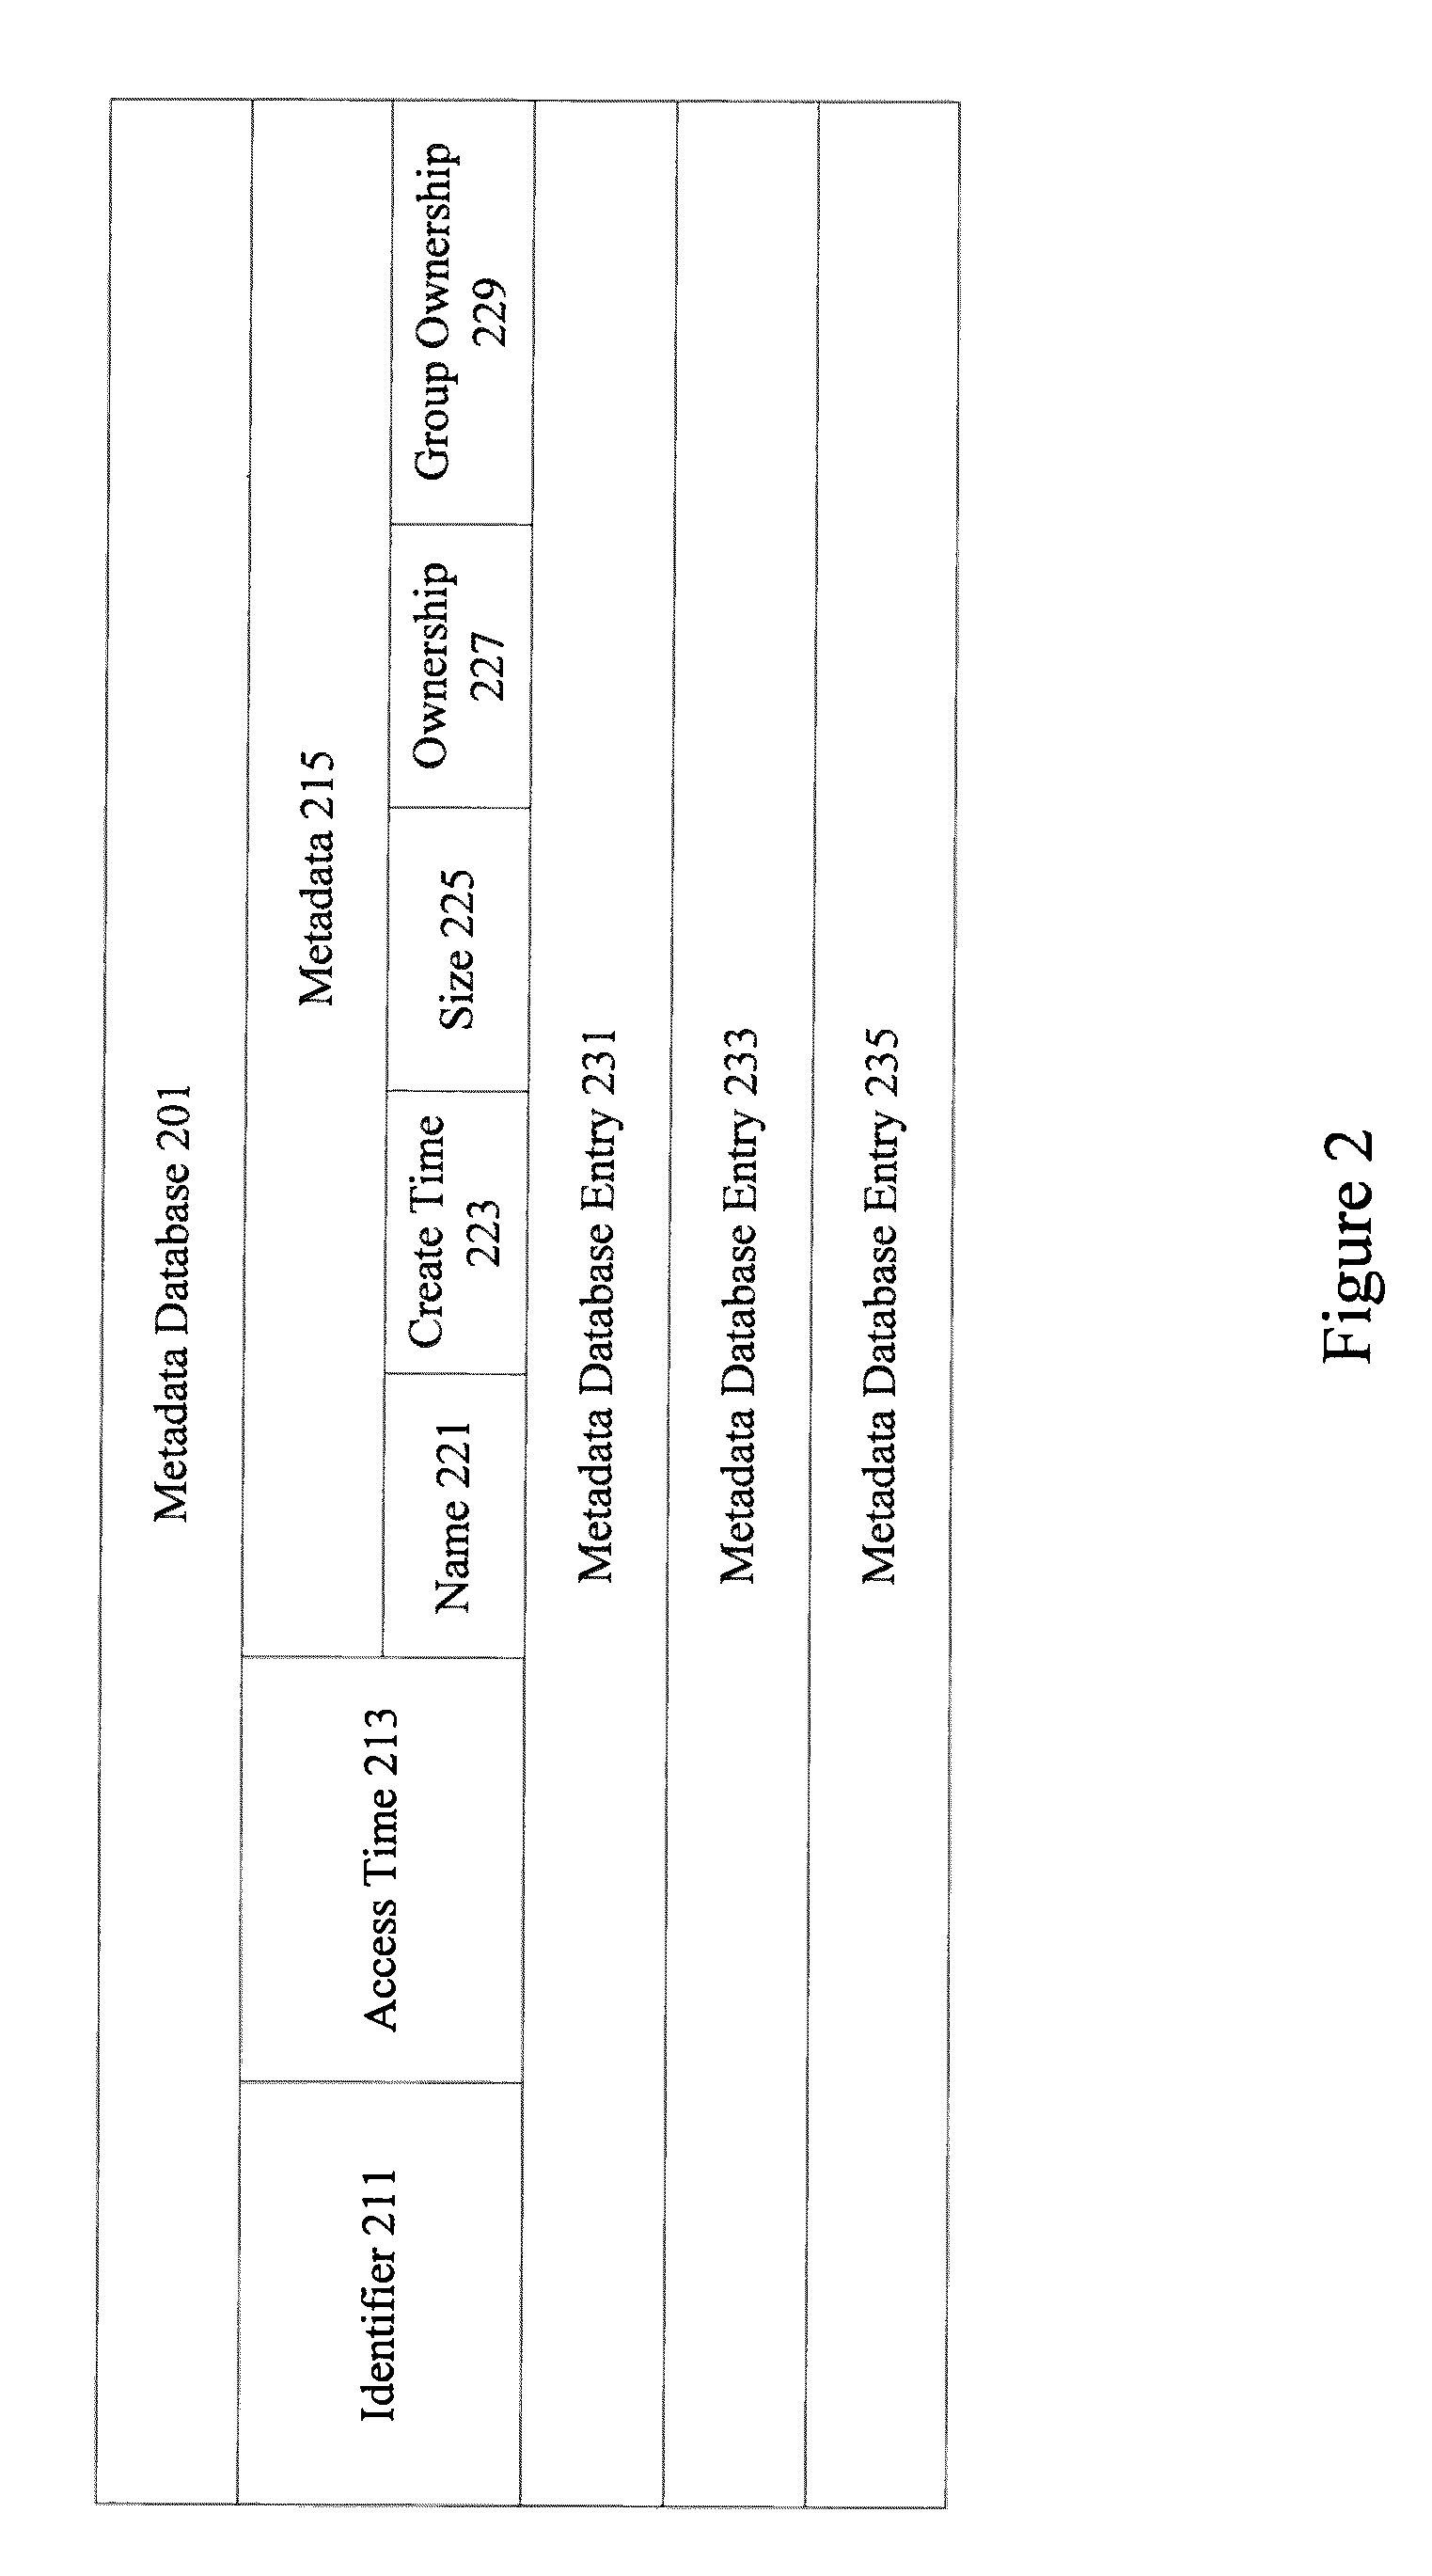 Representing and storing an optimized file system using a system of symlinks, hardlinks and file archives